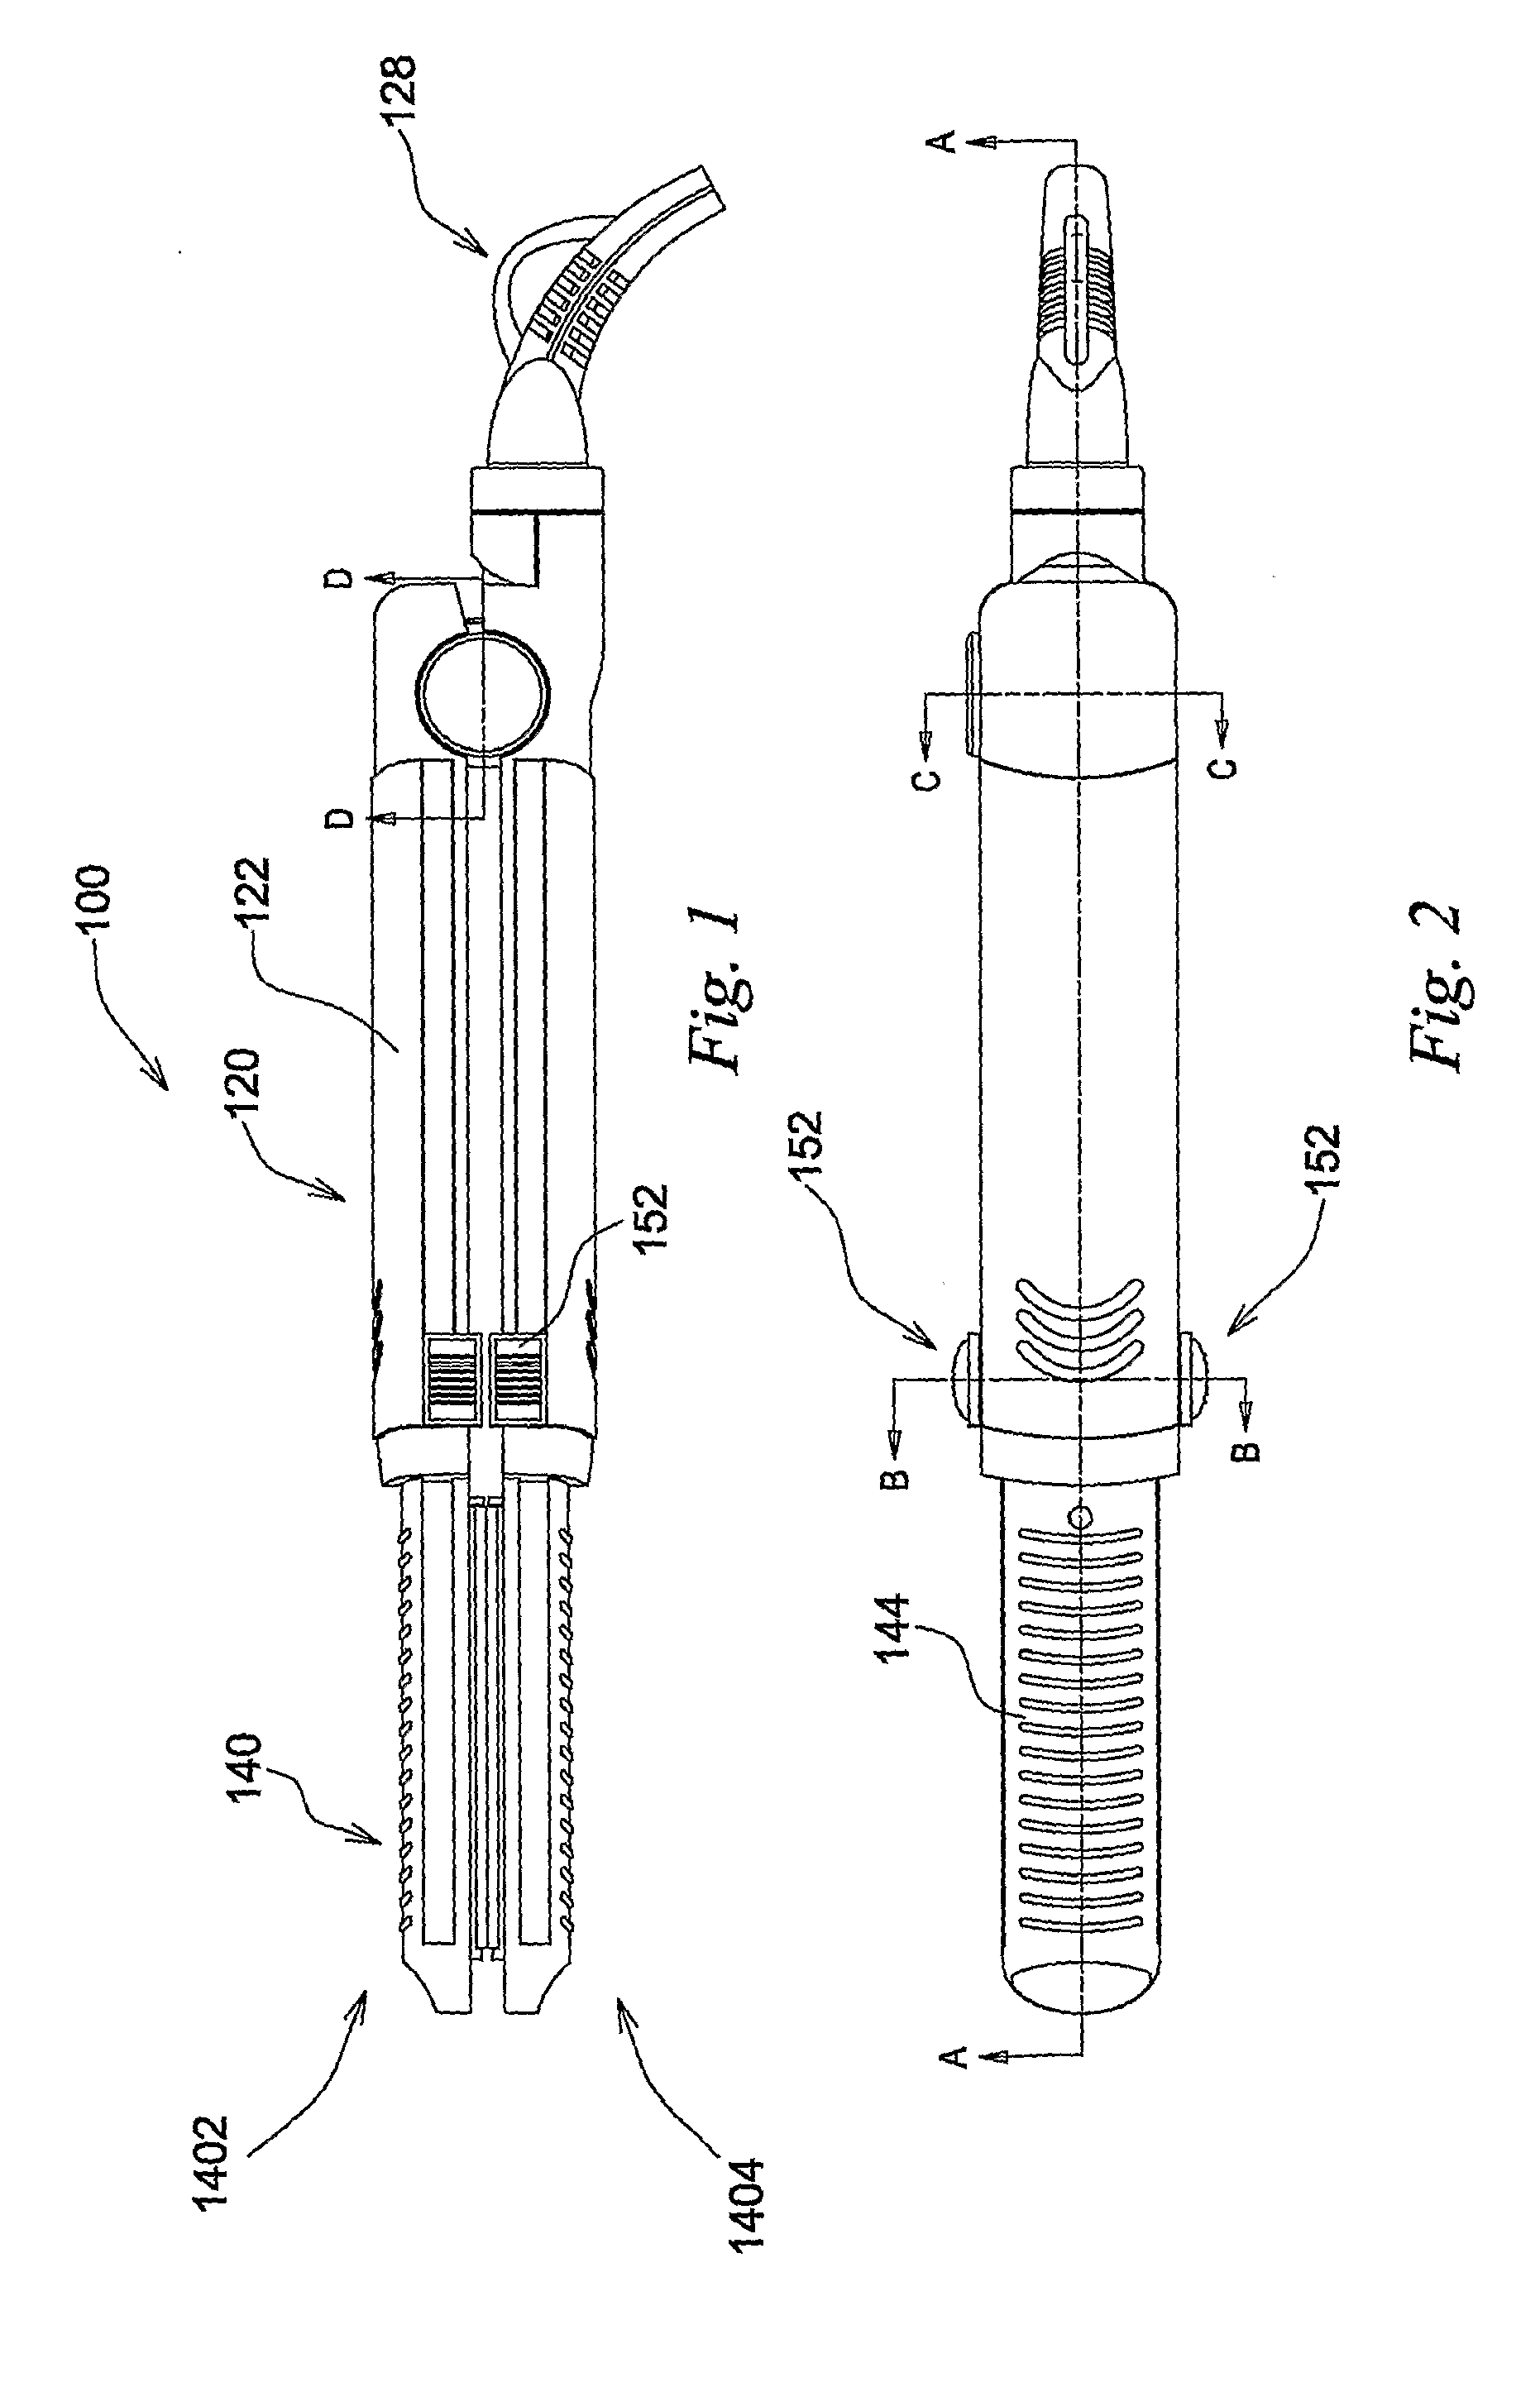 Hair styling apparatus with retractable styling heads